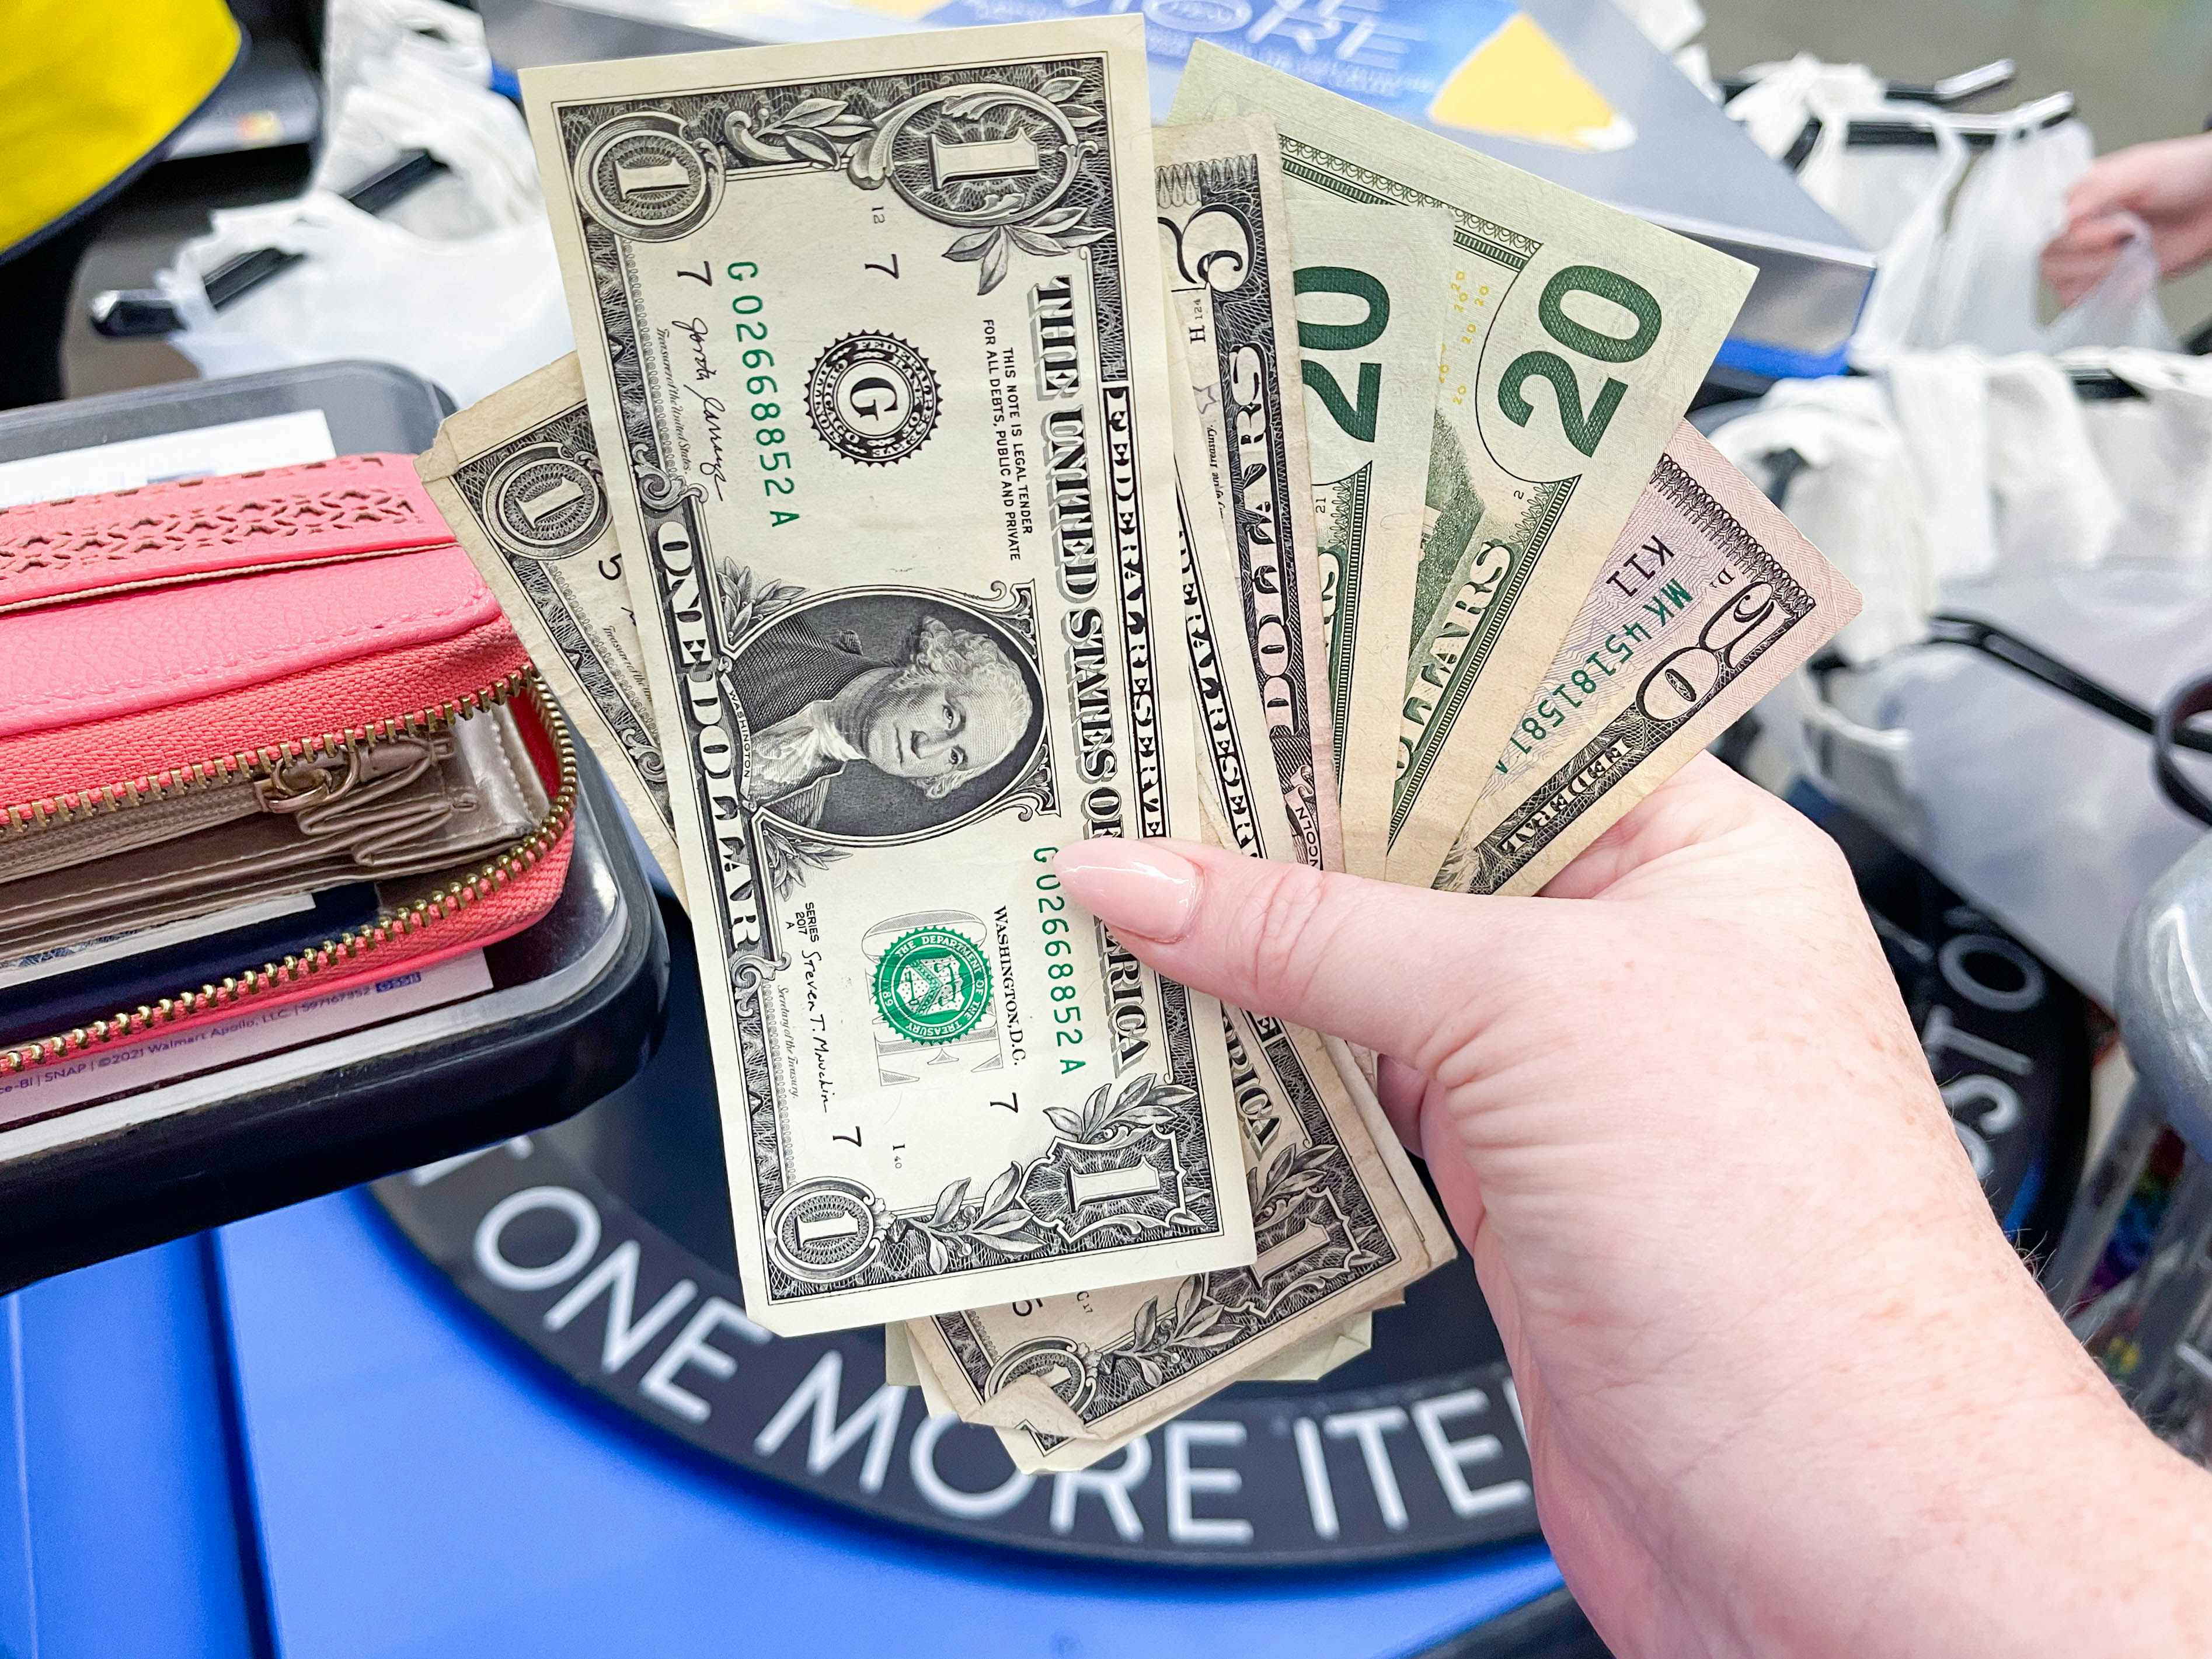 A person's hand holding up $98 in cash at the checkout lane in Walmart.